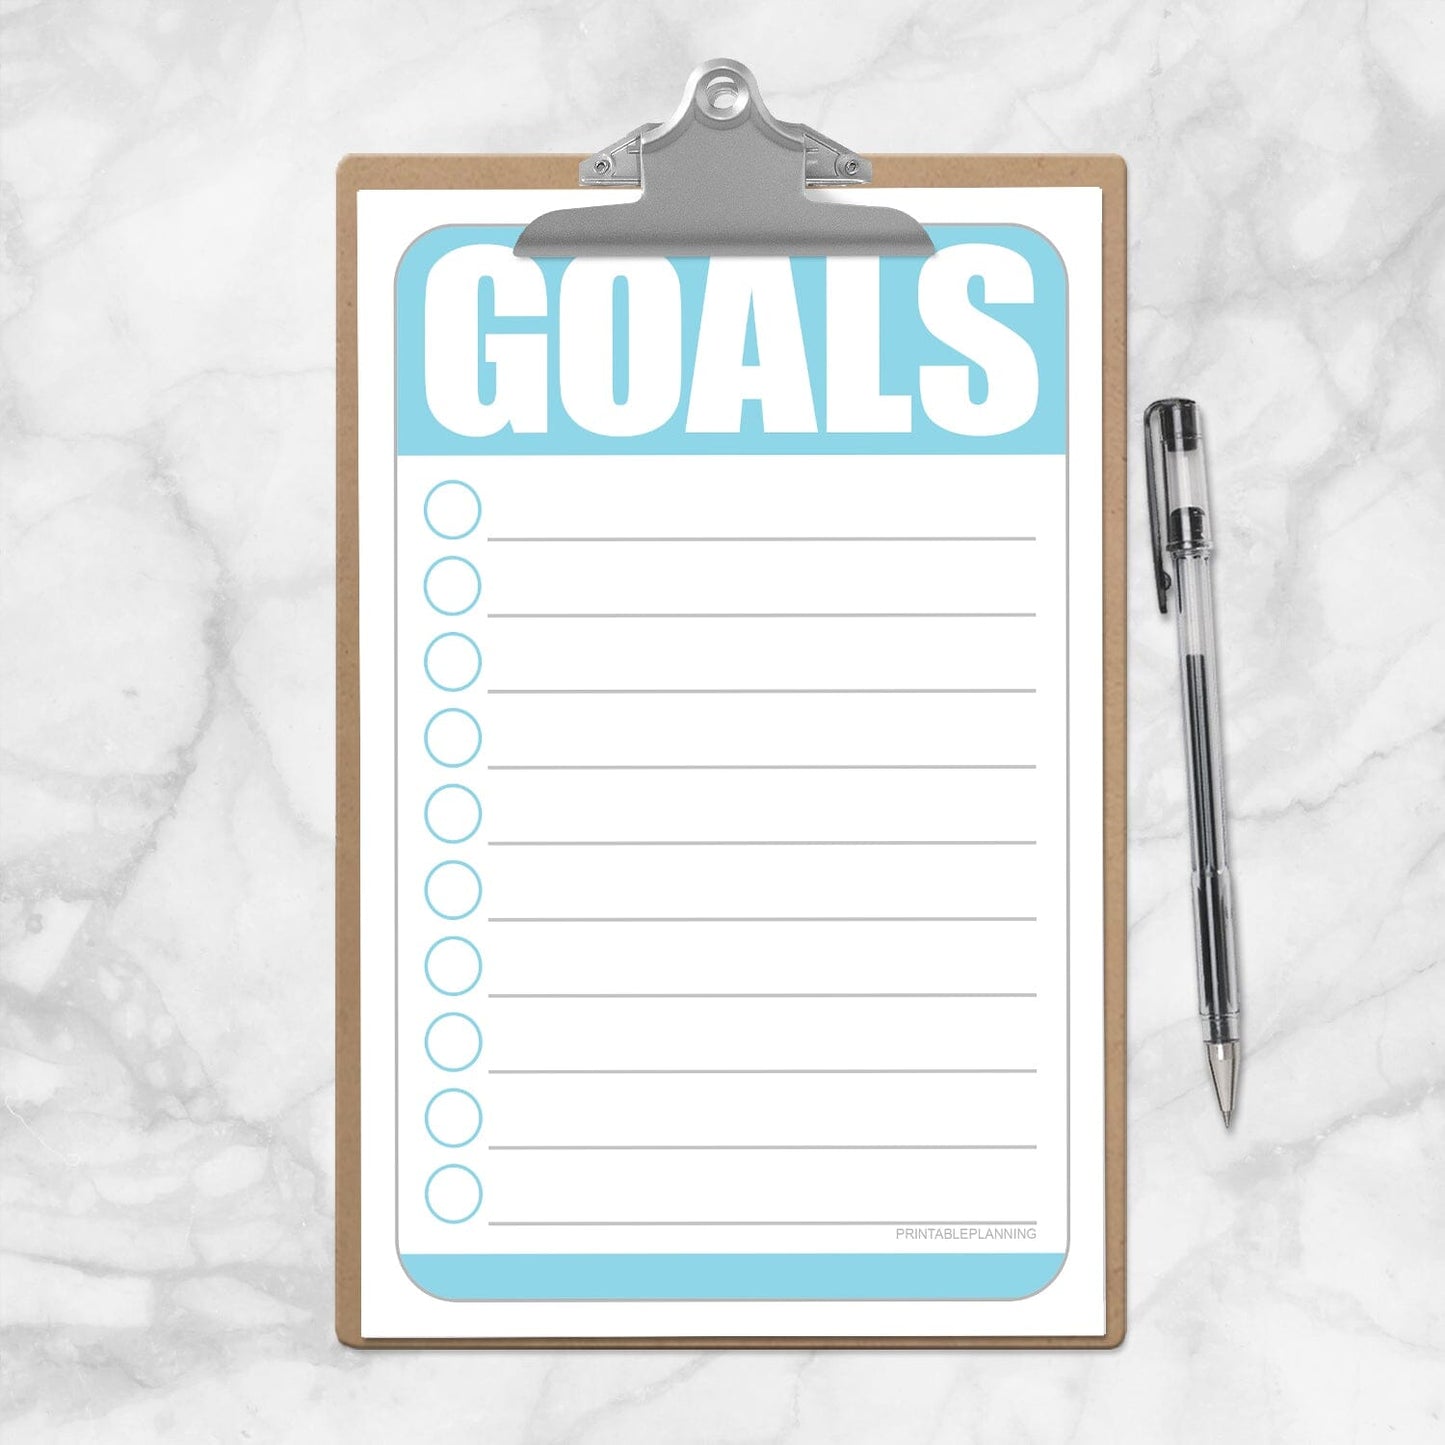 Printable Goals - Blue Half Page Checklist at Printable Planning. Photo shows the half page checklist on a mini clipboard.